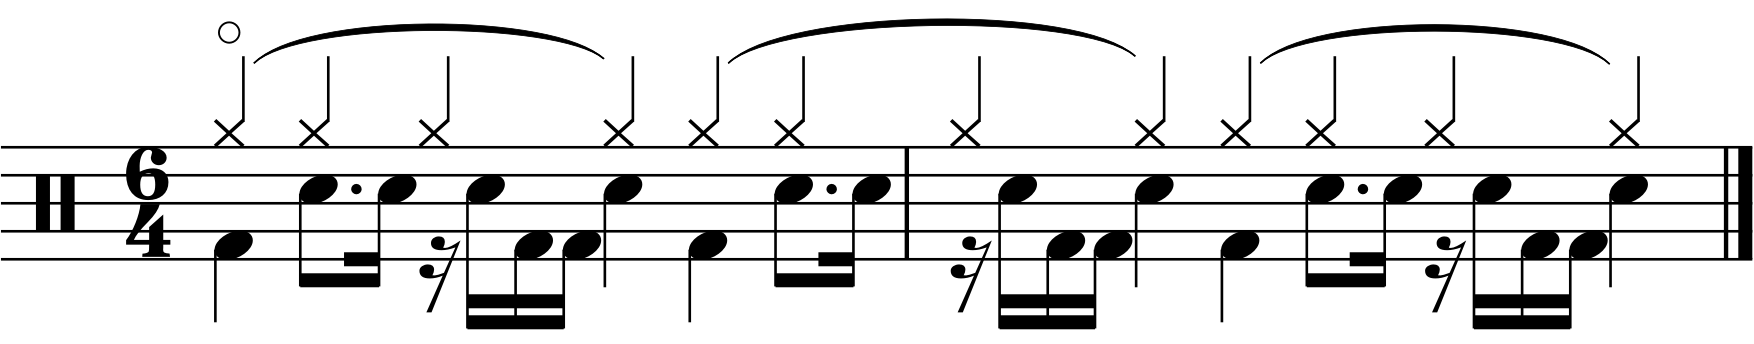 A 6/4 wrap around groove